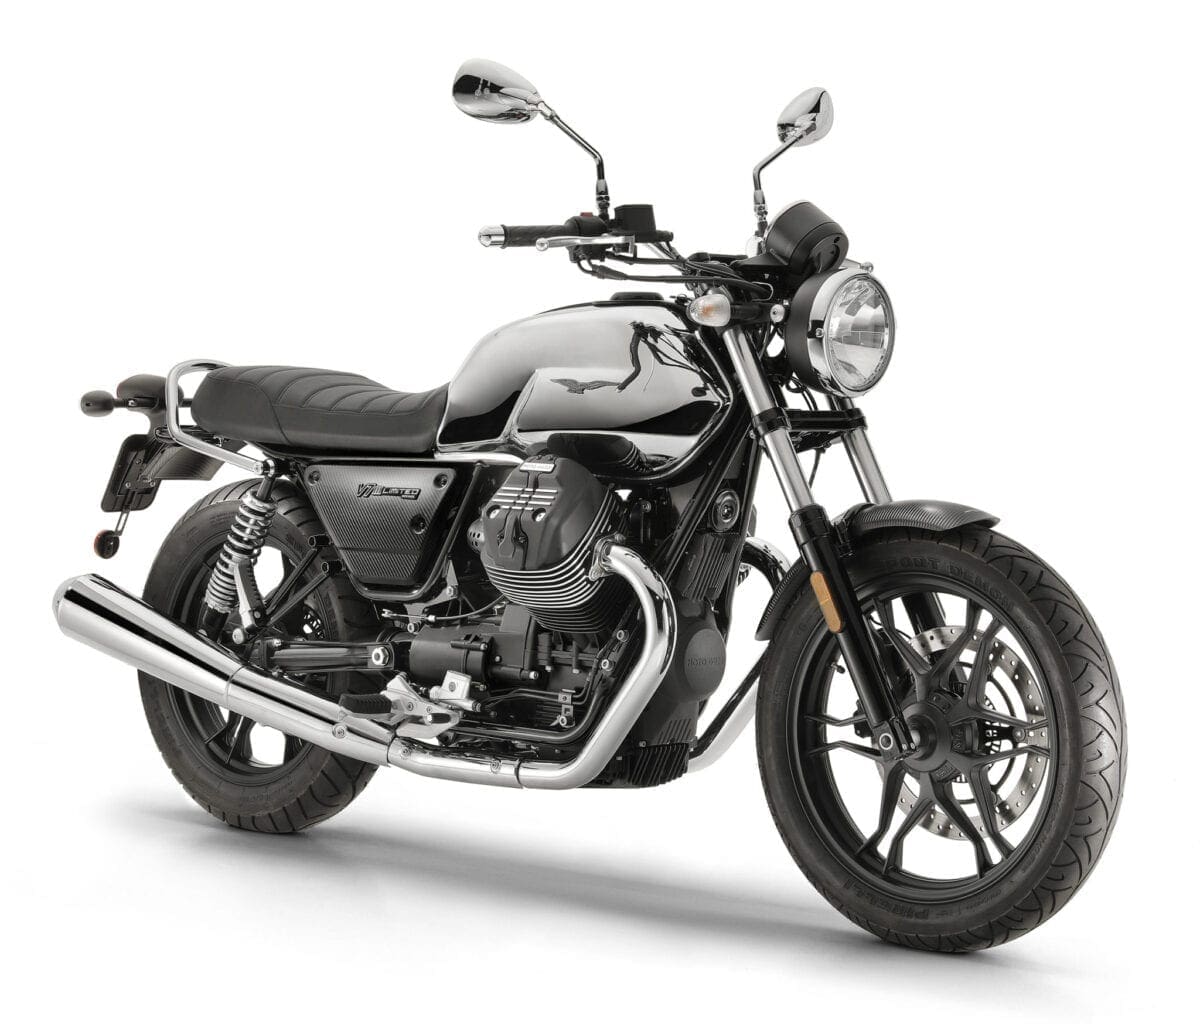 Moto Guzzi unveils its limited edition chrome V7 III. Only 500 being made.